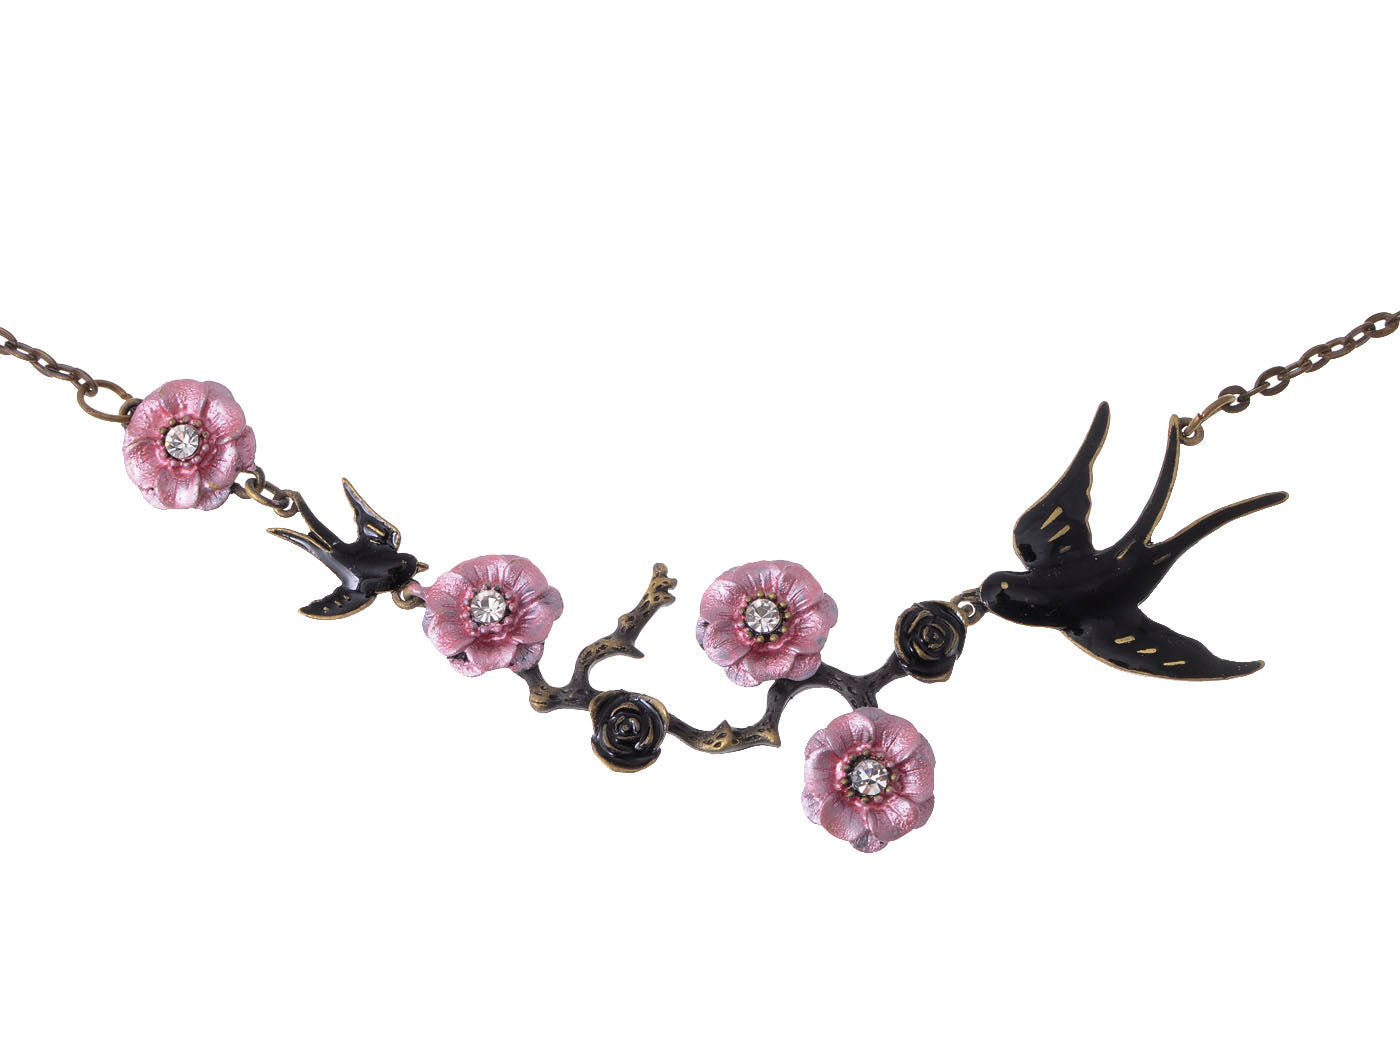 Cute Pink Cherry Blossom Necklace